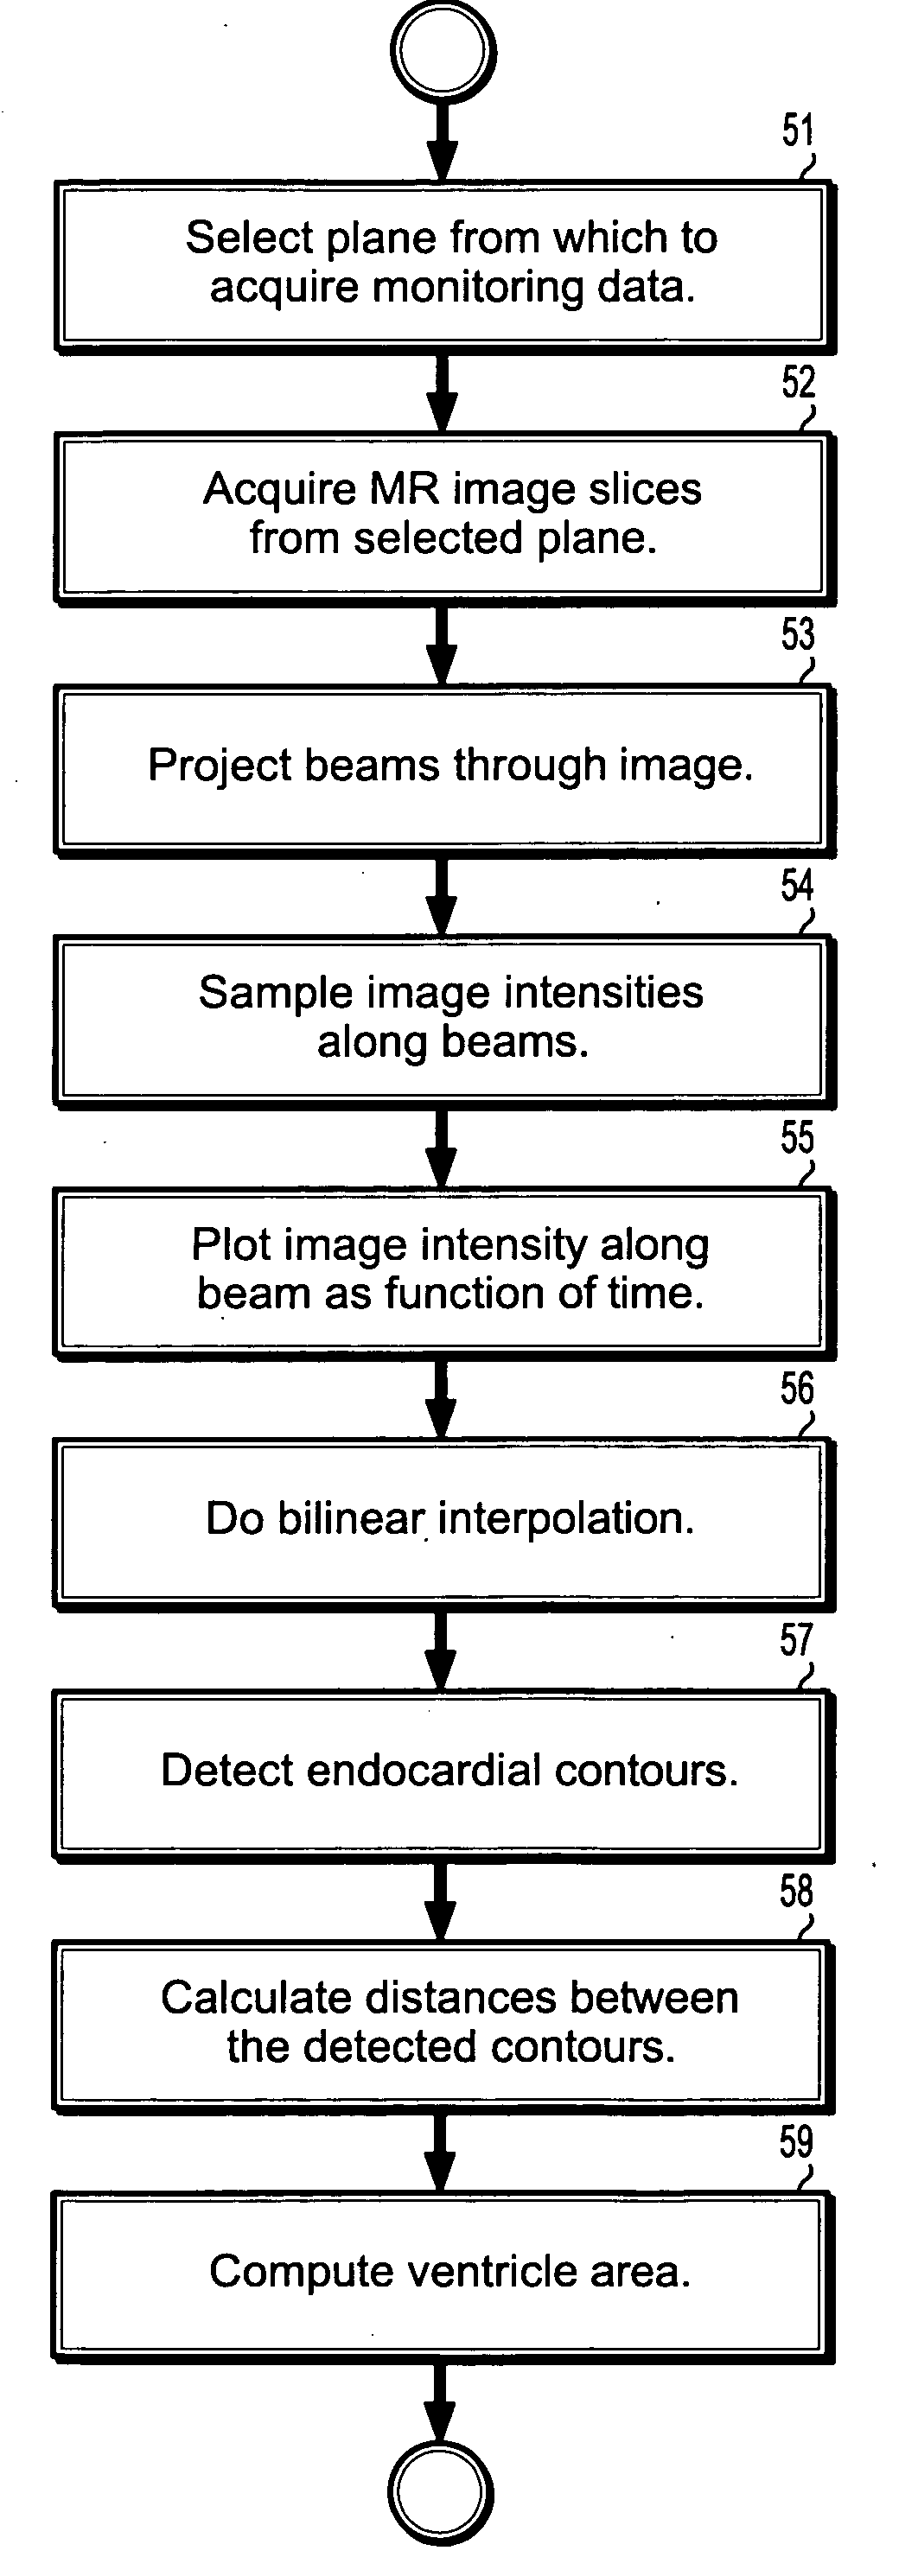 System and method for image based physiological monitoring of cardiovascular function